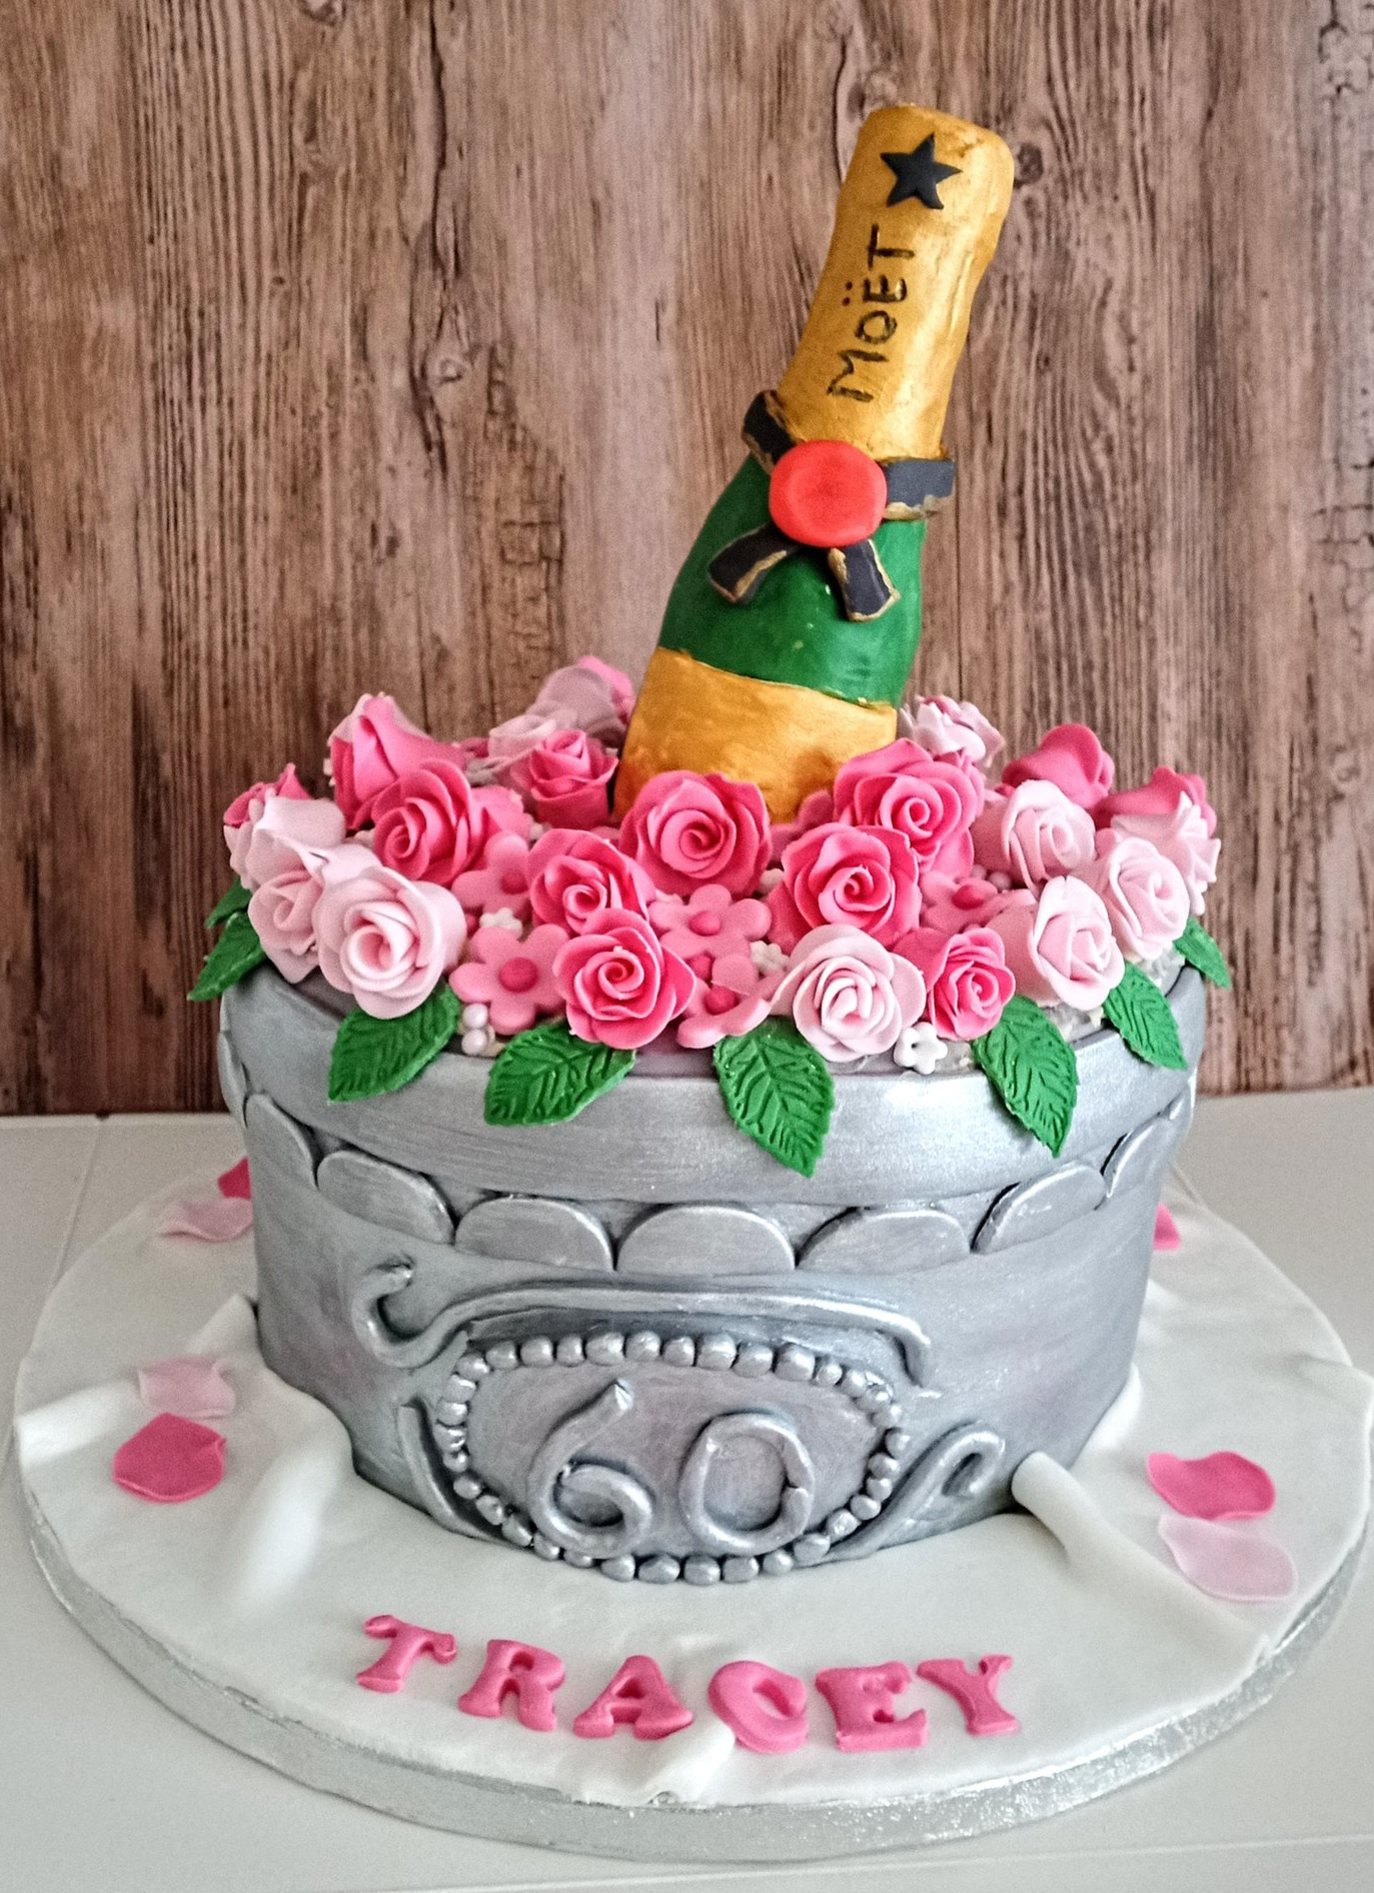 Champagne in a bucket birthday cake